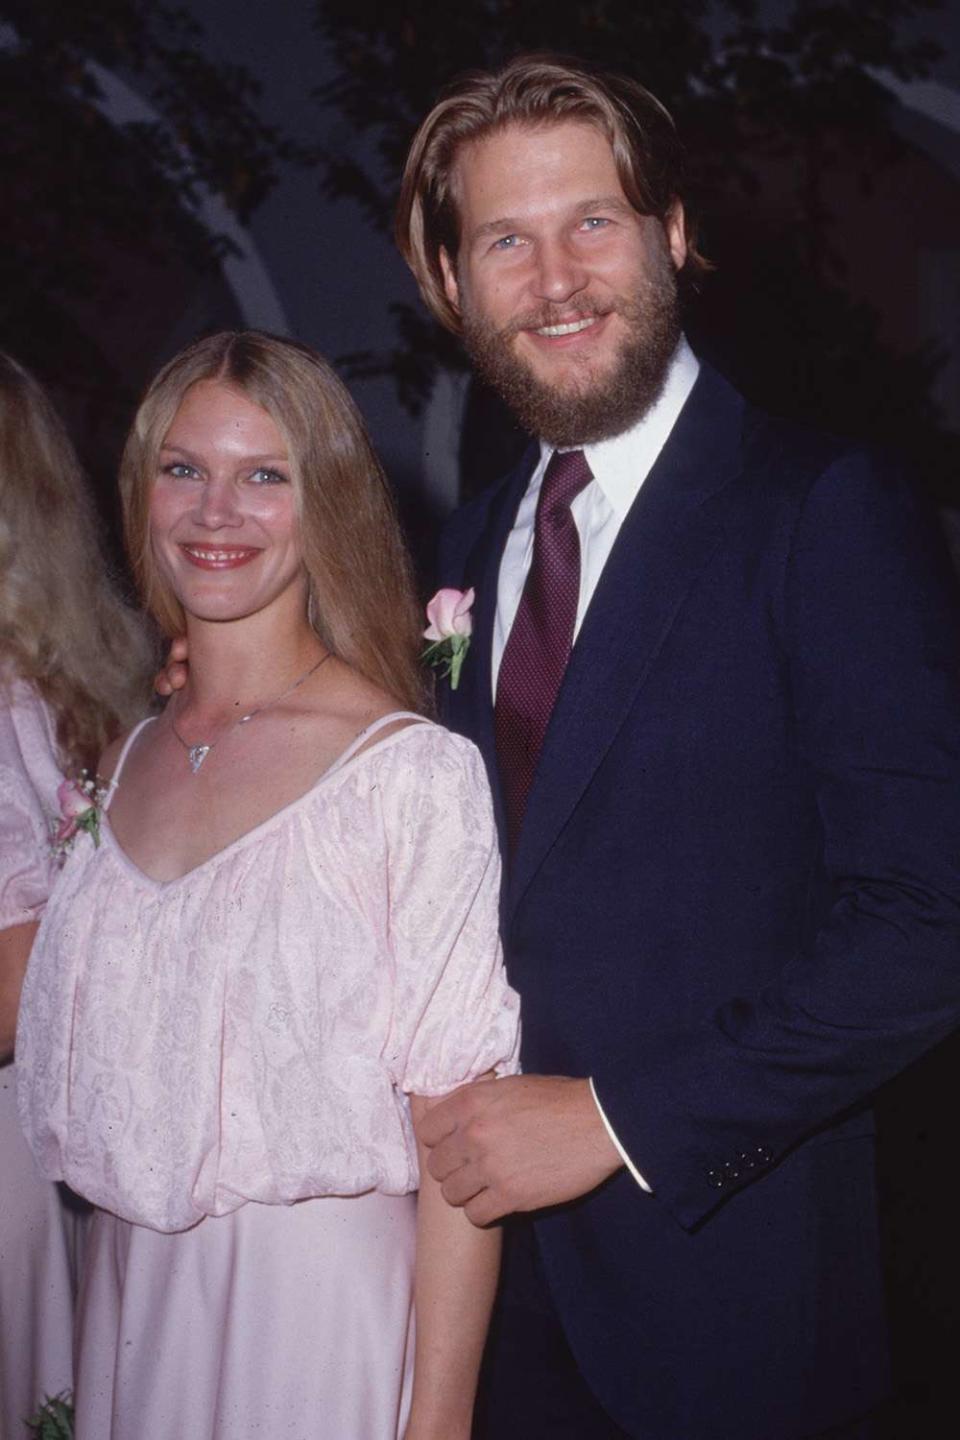 <p>The newlyweds made for a handsome couple at a formal event in 1978.</p>